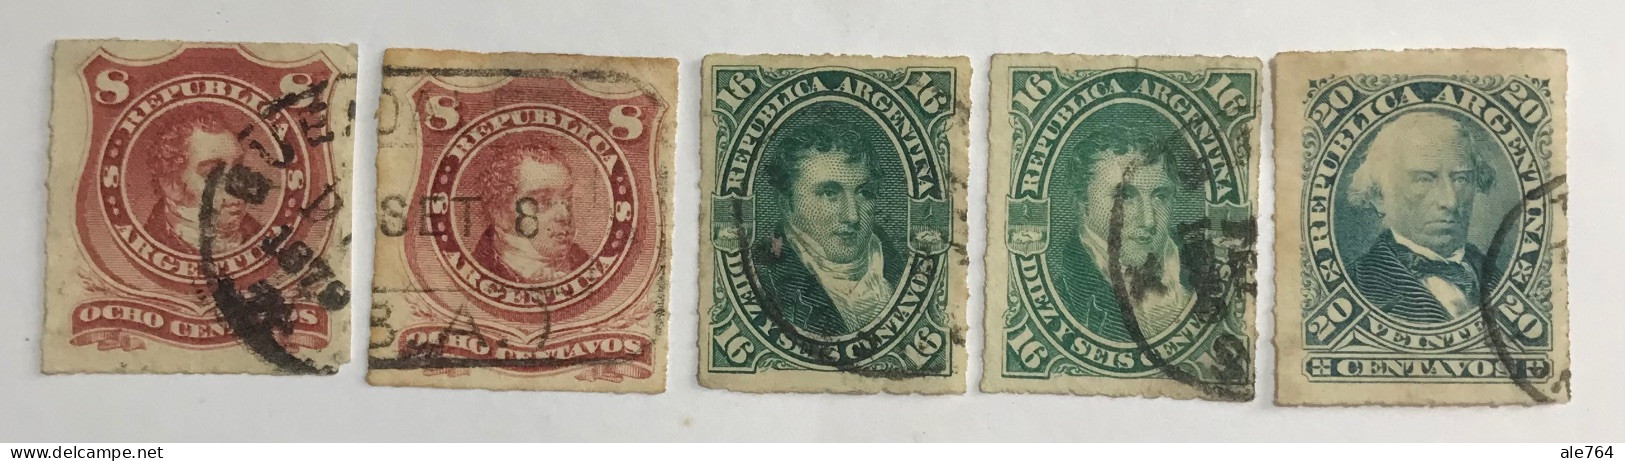 Argentina 1876/7, Rouletted, Rivadavia, Belgrano, Velez Sarfield, GJ 49/51, Scoot 35/7, Y 33/5, Used. - Gebraucht